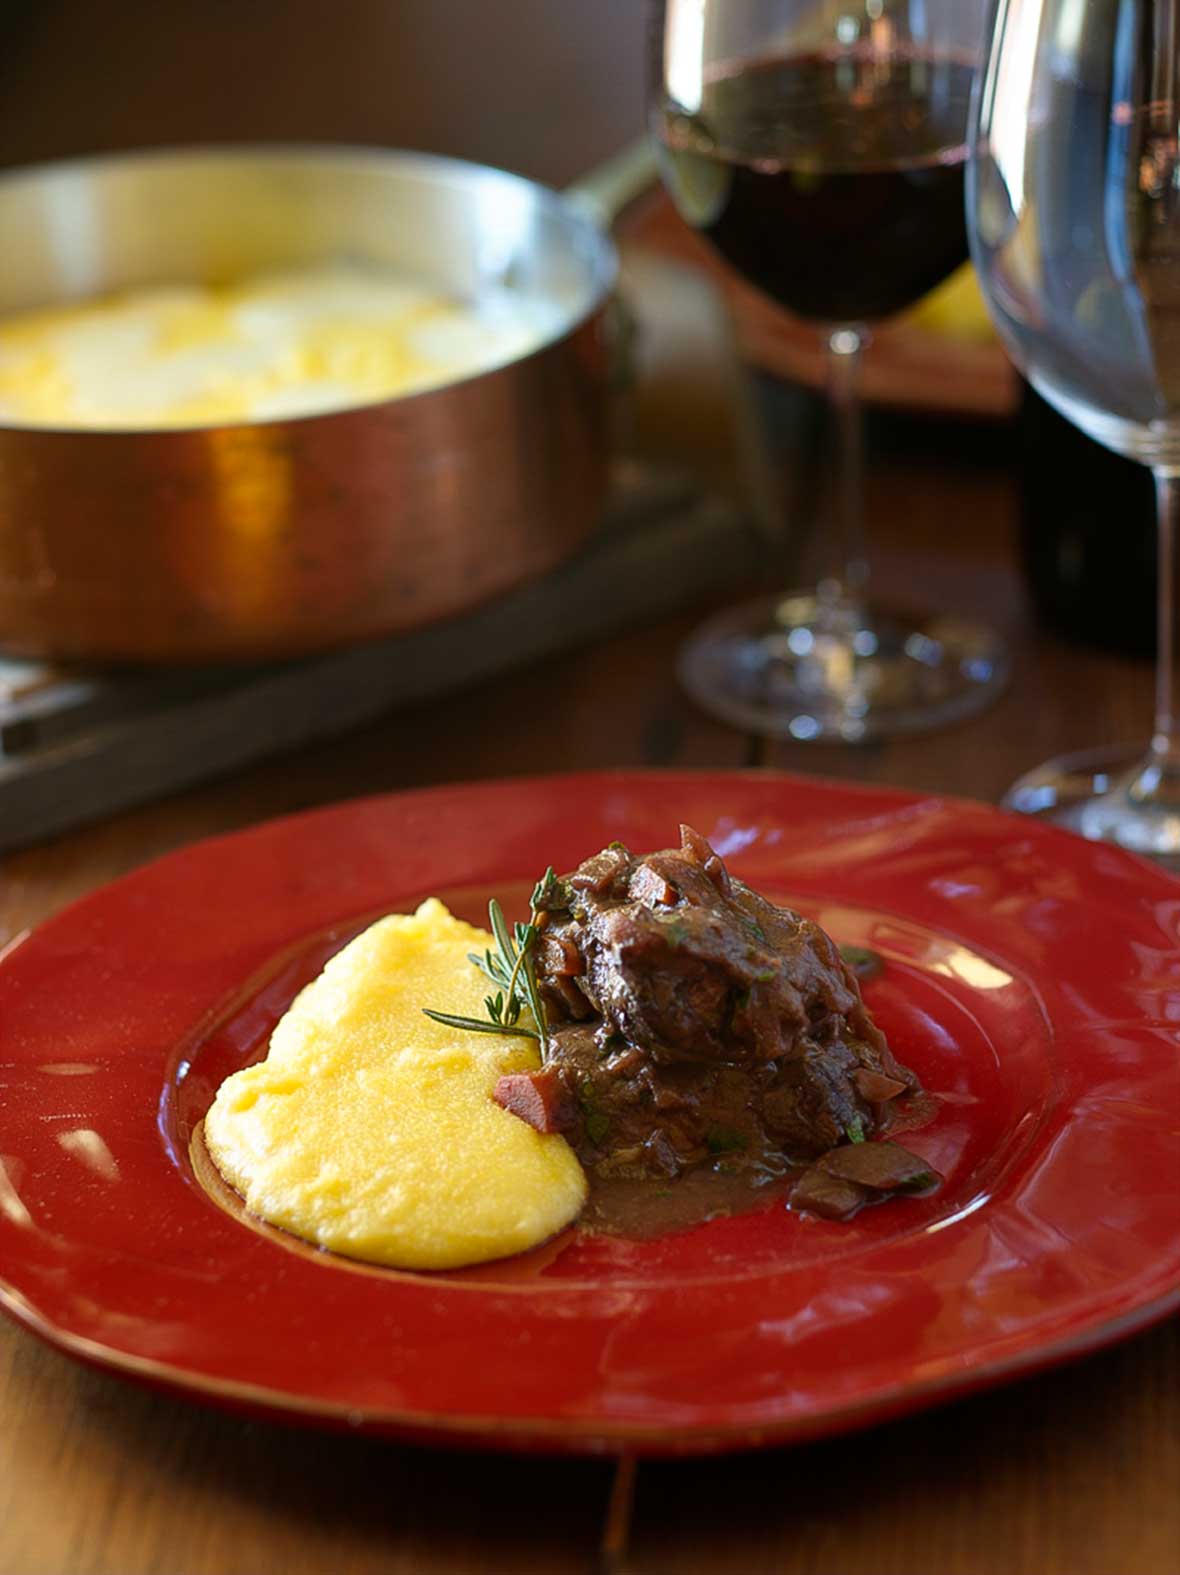 Rabbit in red wine, Ischia style, on a red plate with a glass of red wine and a pan of polenta in the background